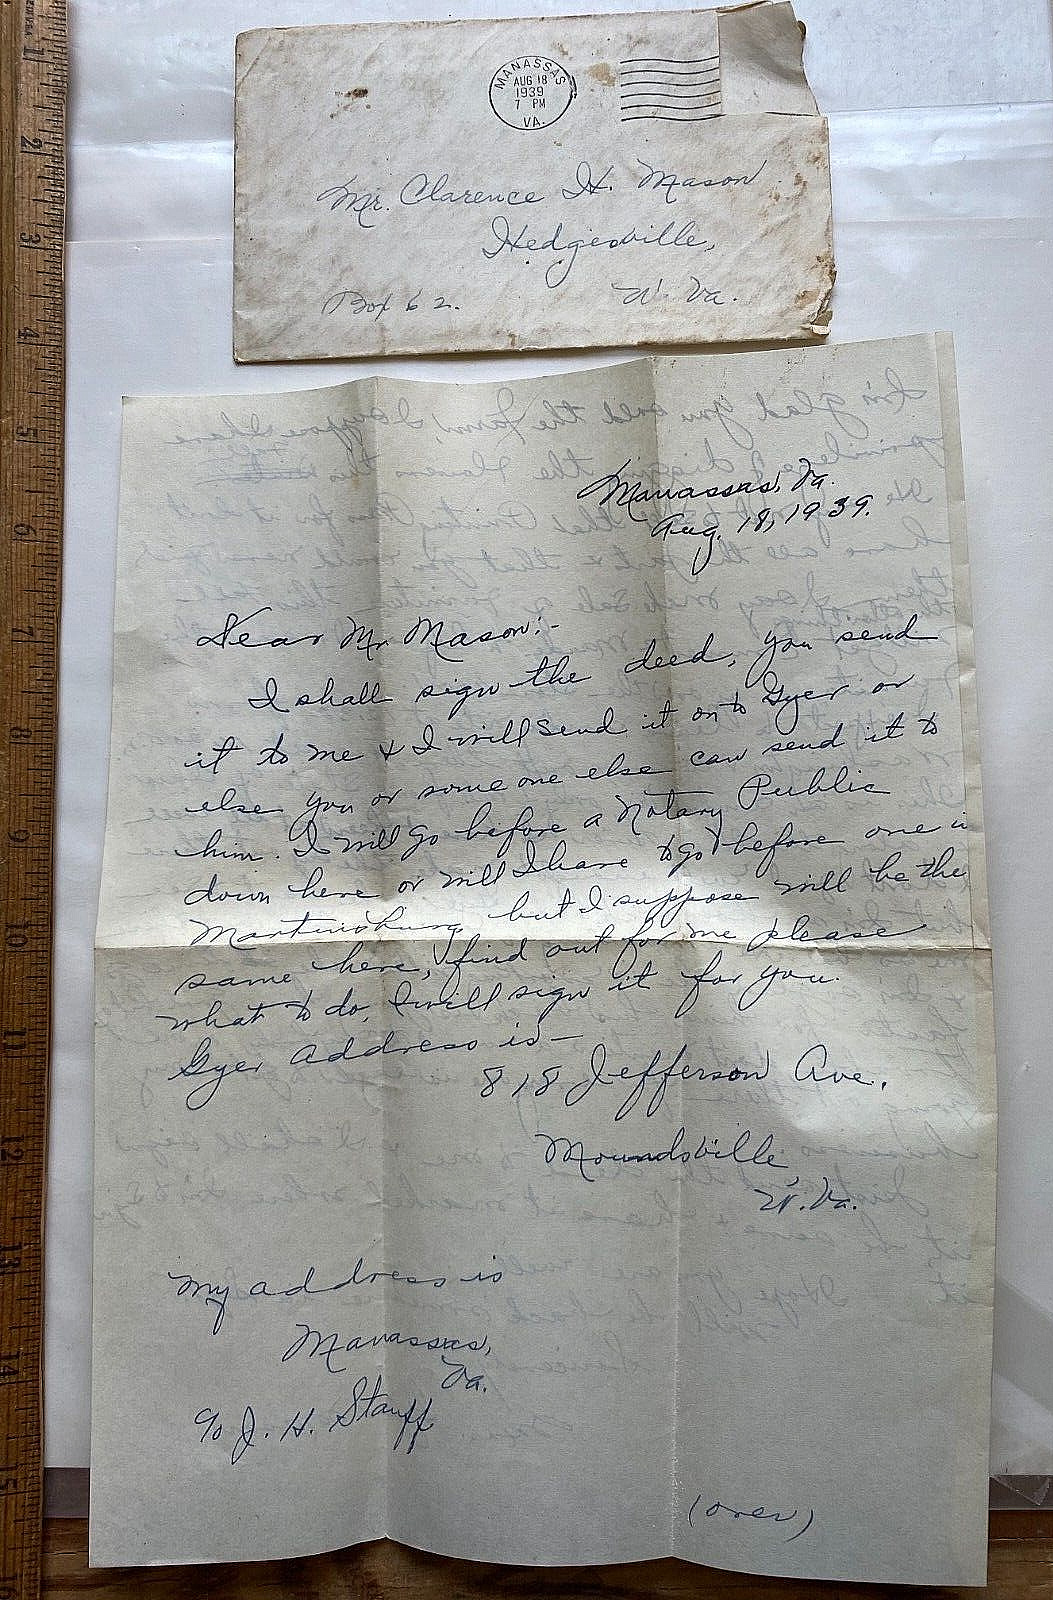 1939 Letter. Manassas, VA-Moundsville, WV  trip to See Husband (in prison there)